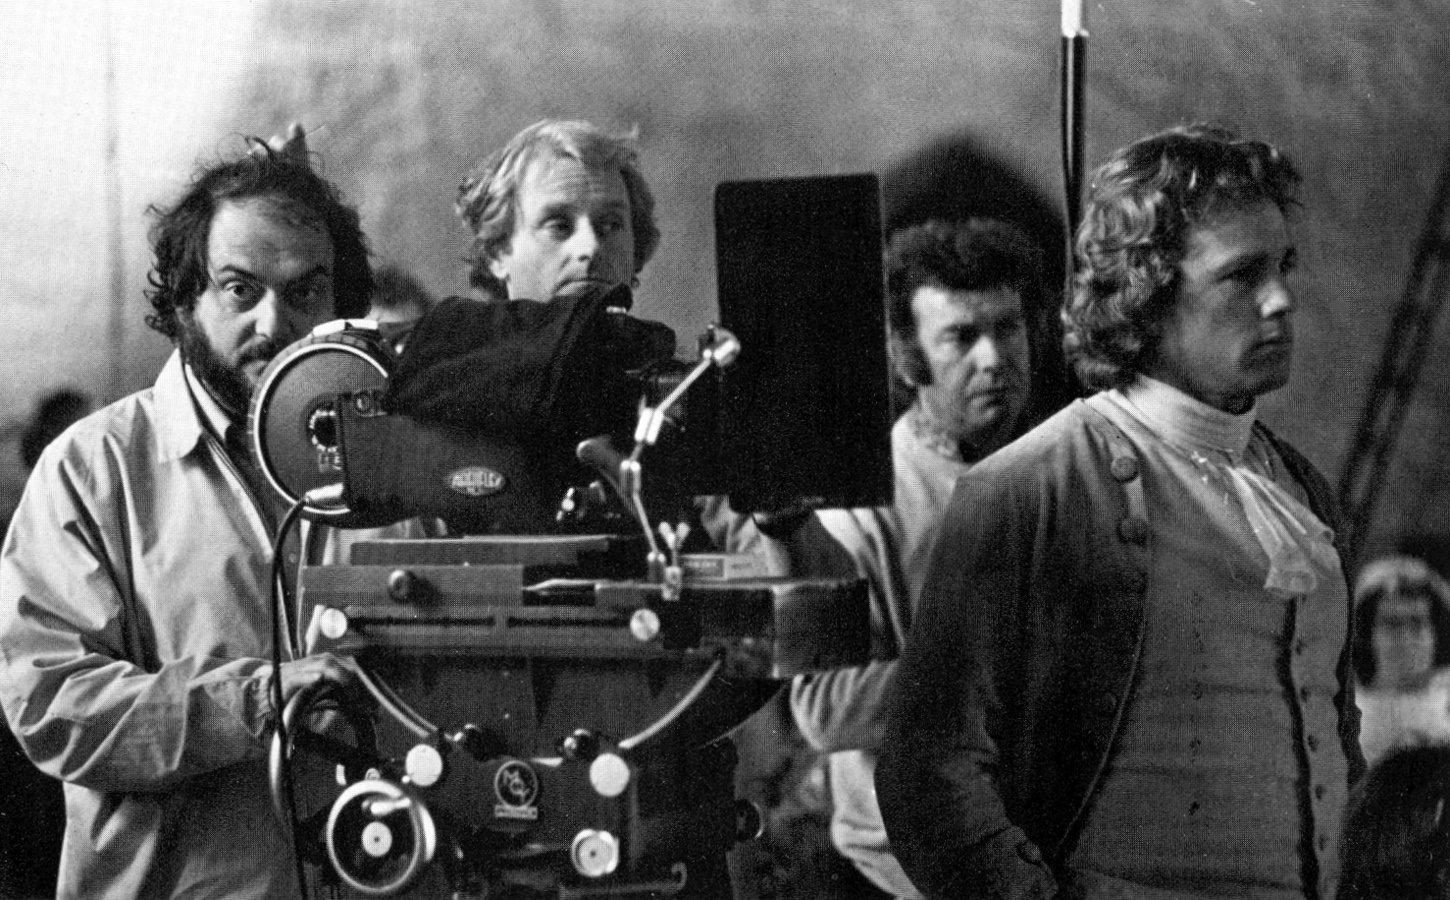 Stanley Kubrick and Ryan O’Neal on the set of Barry Lyndon, 1974